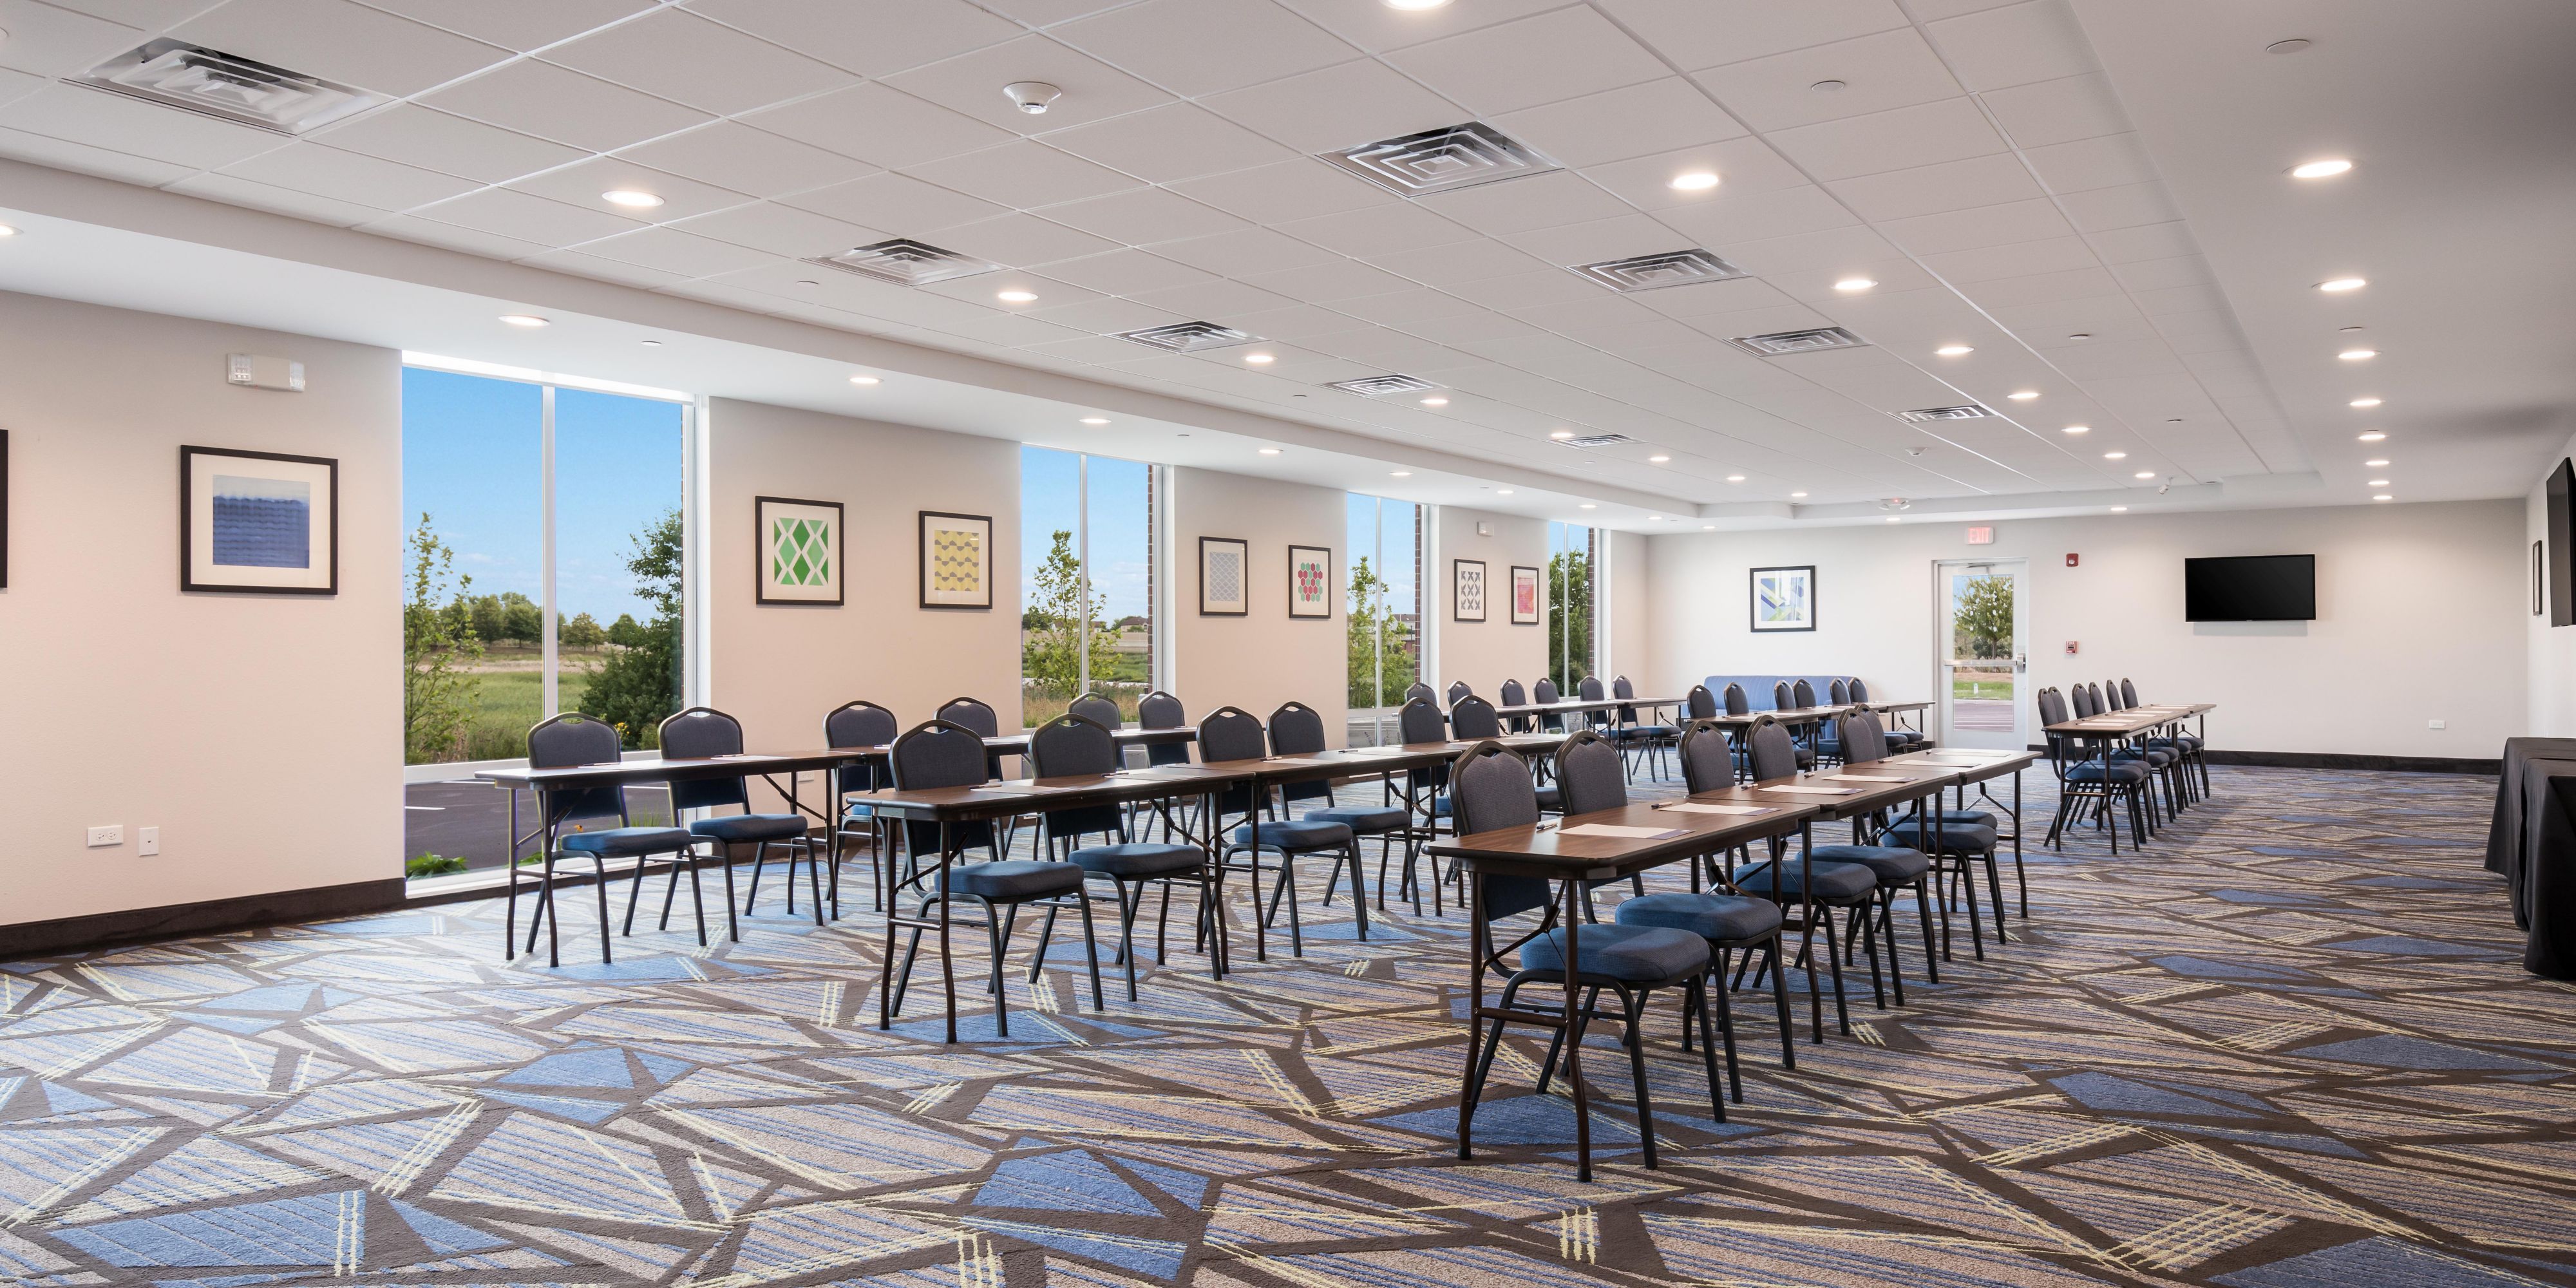 The Holiday Inn Express & Suites Chicago - Hoffman Estates is centrally located within Prairie Stone Parkway and surrounded by innovative and modern corporate and dining/entertainment venues to meet to all of your needs.